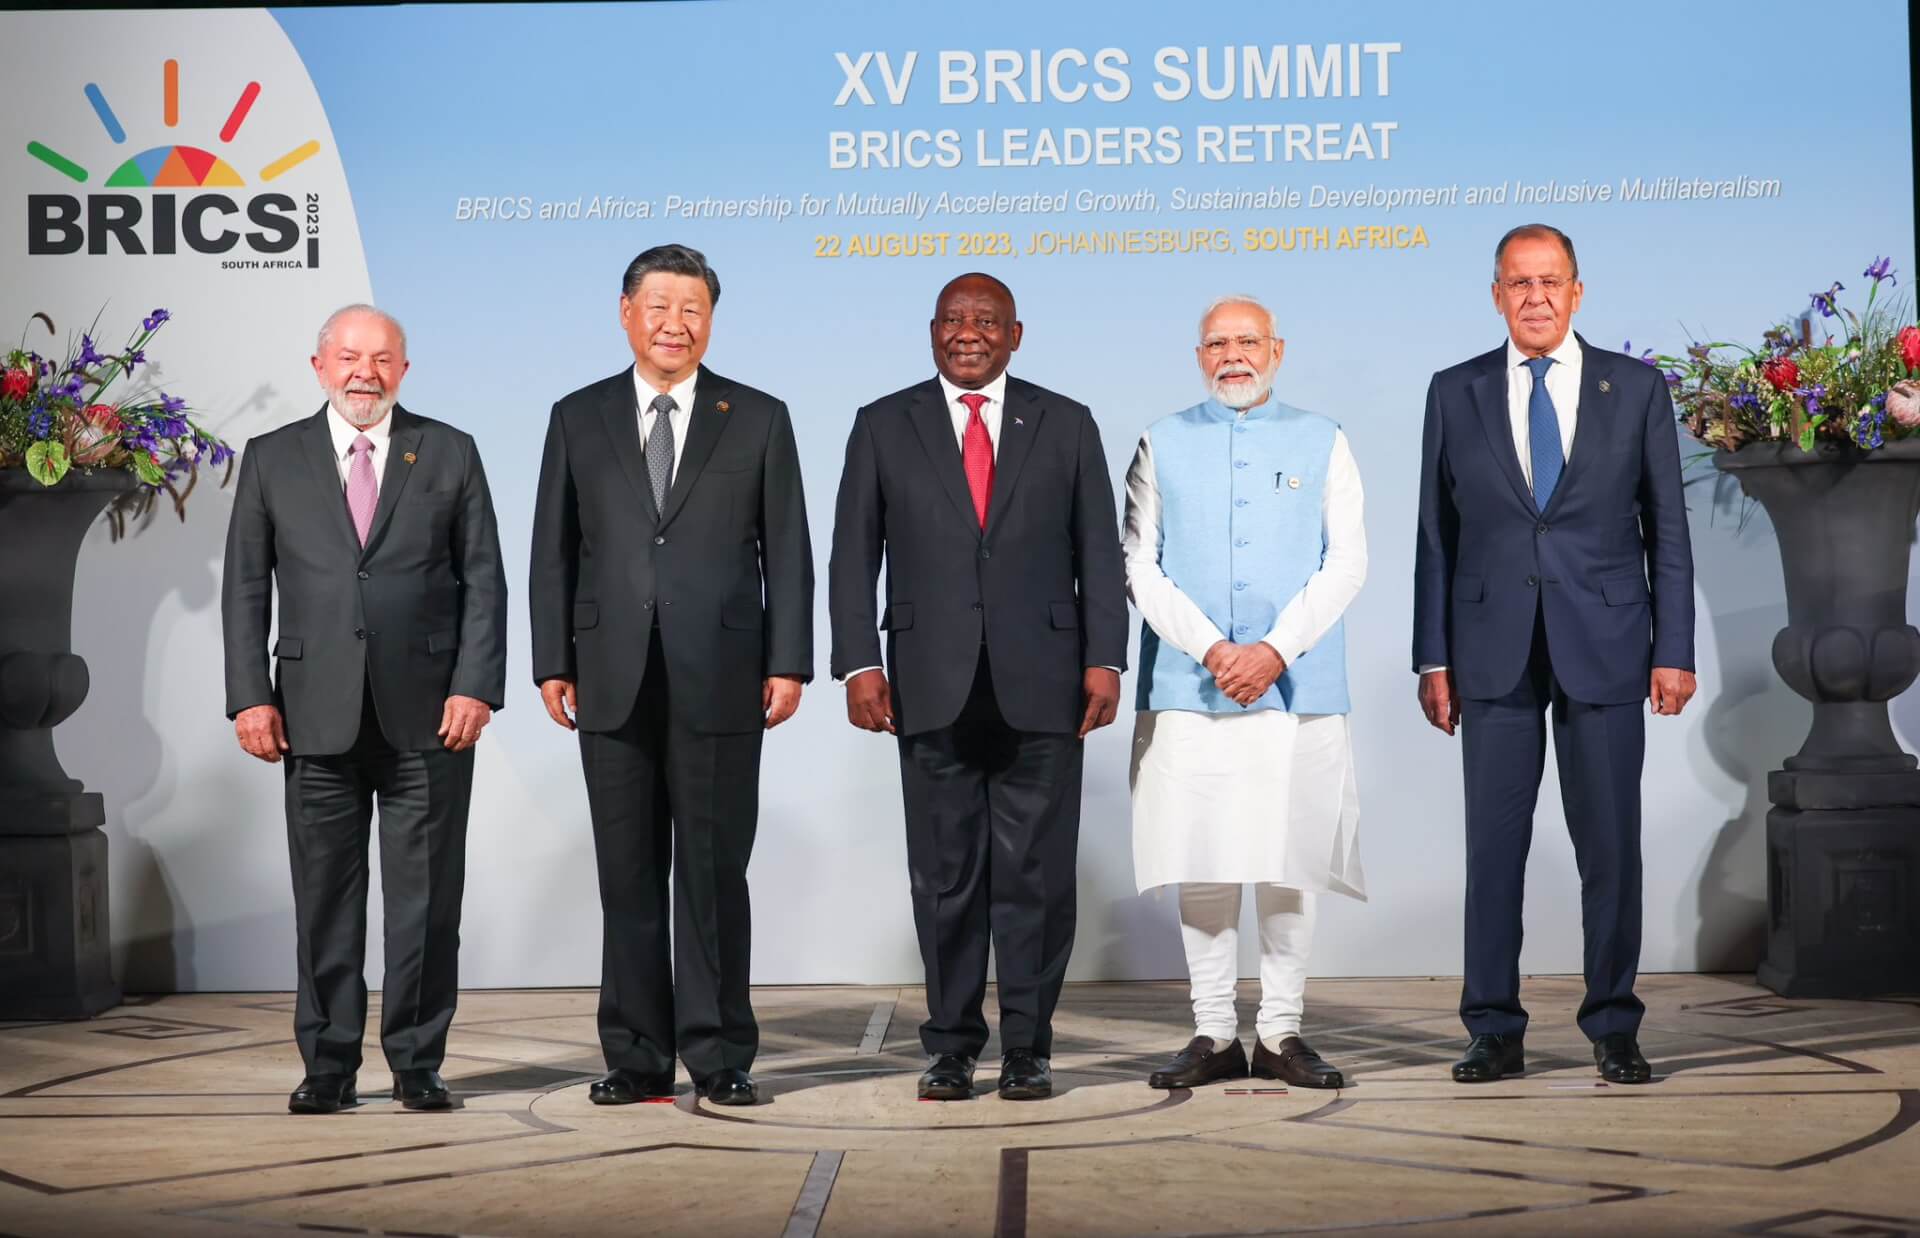 Statecraft Explains | Why are So Many Countries Flocking to Join BRICS?